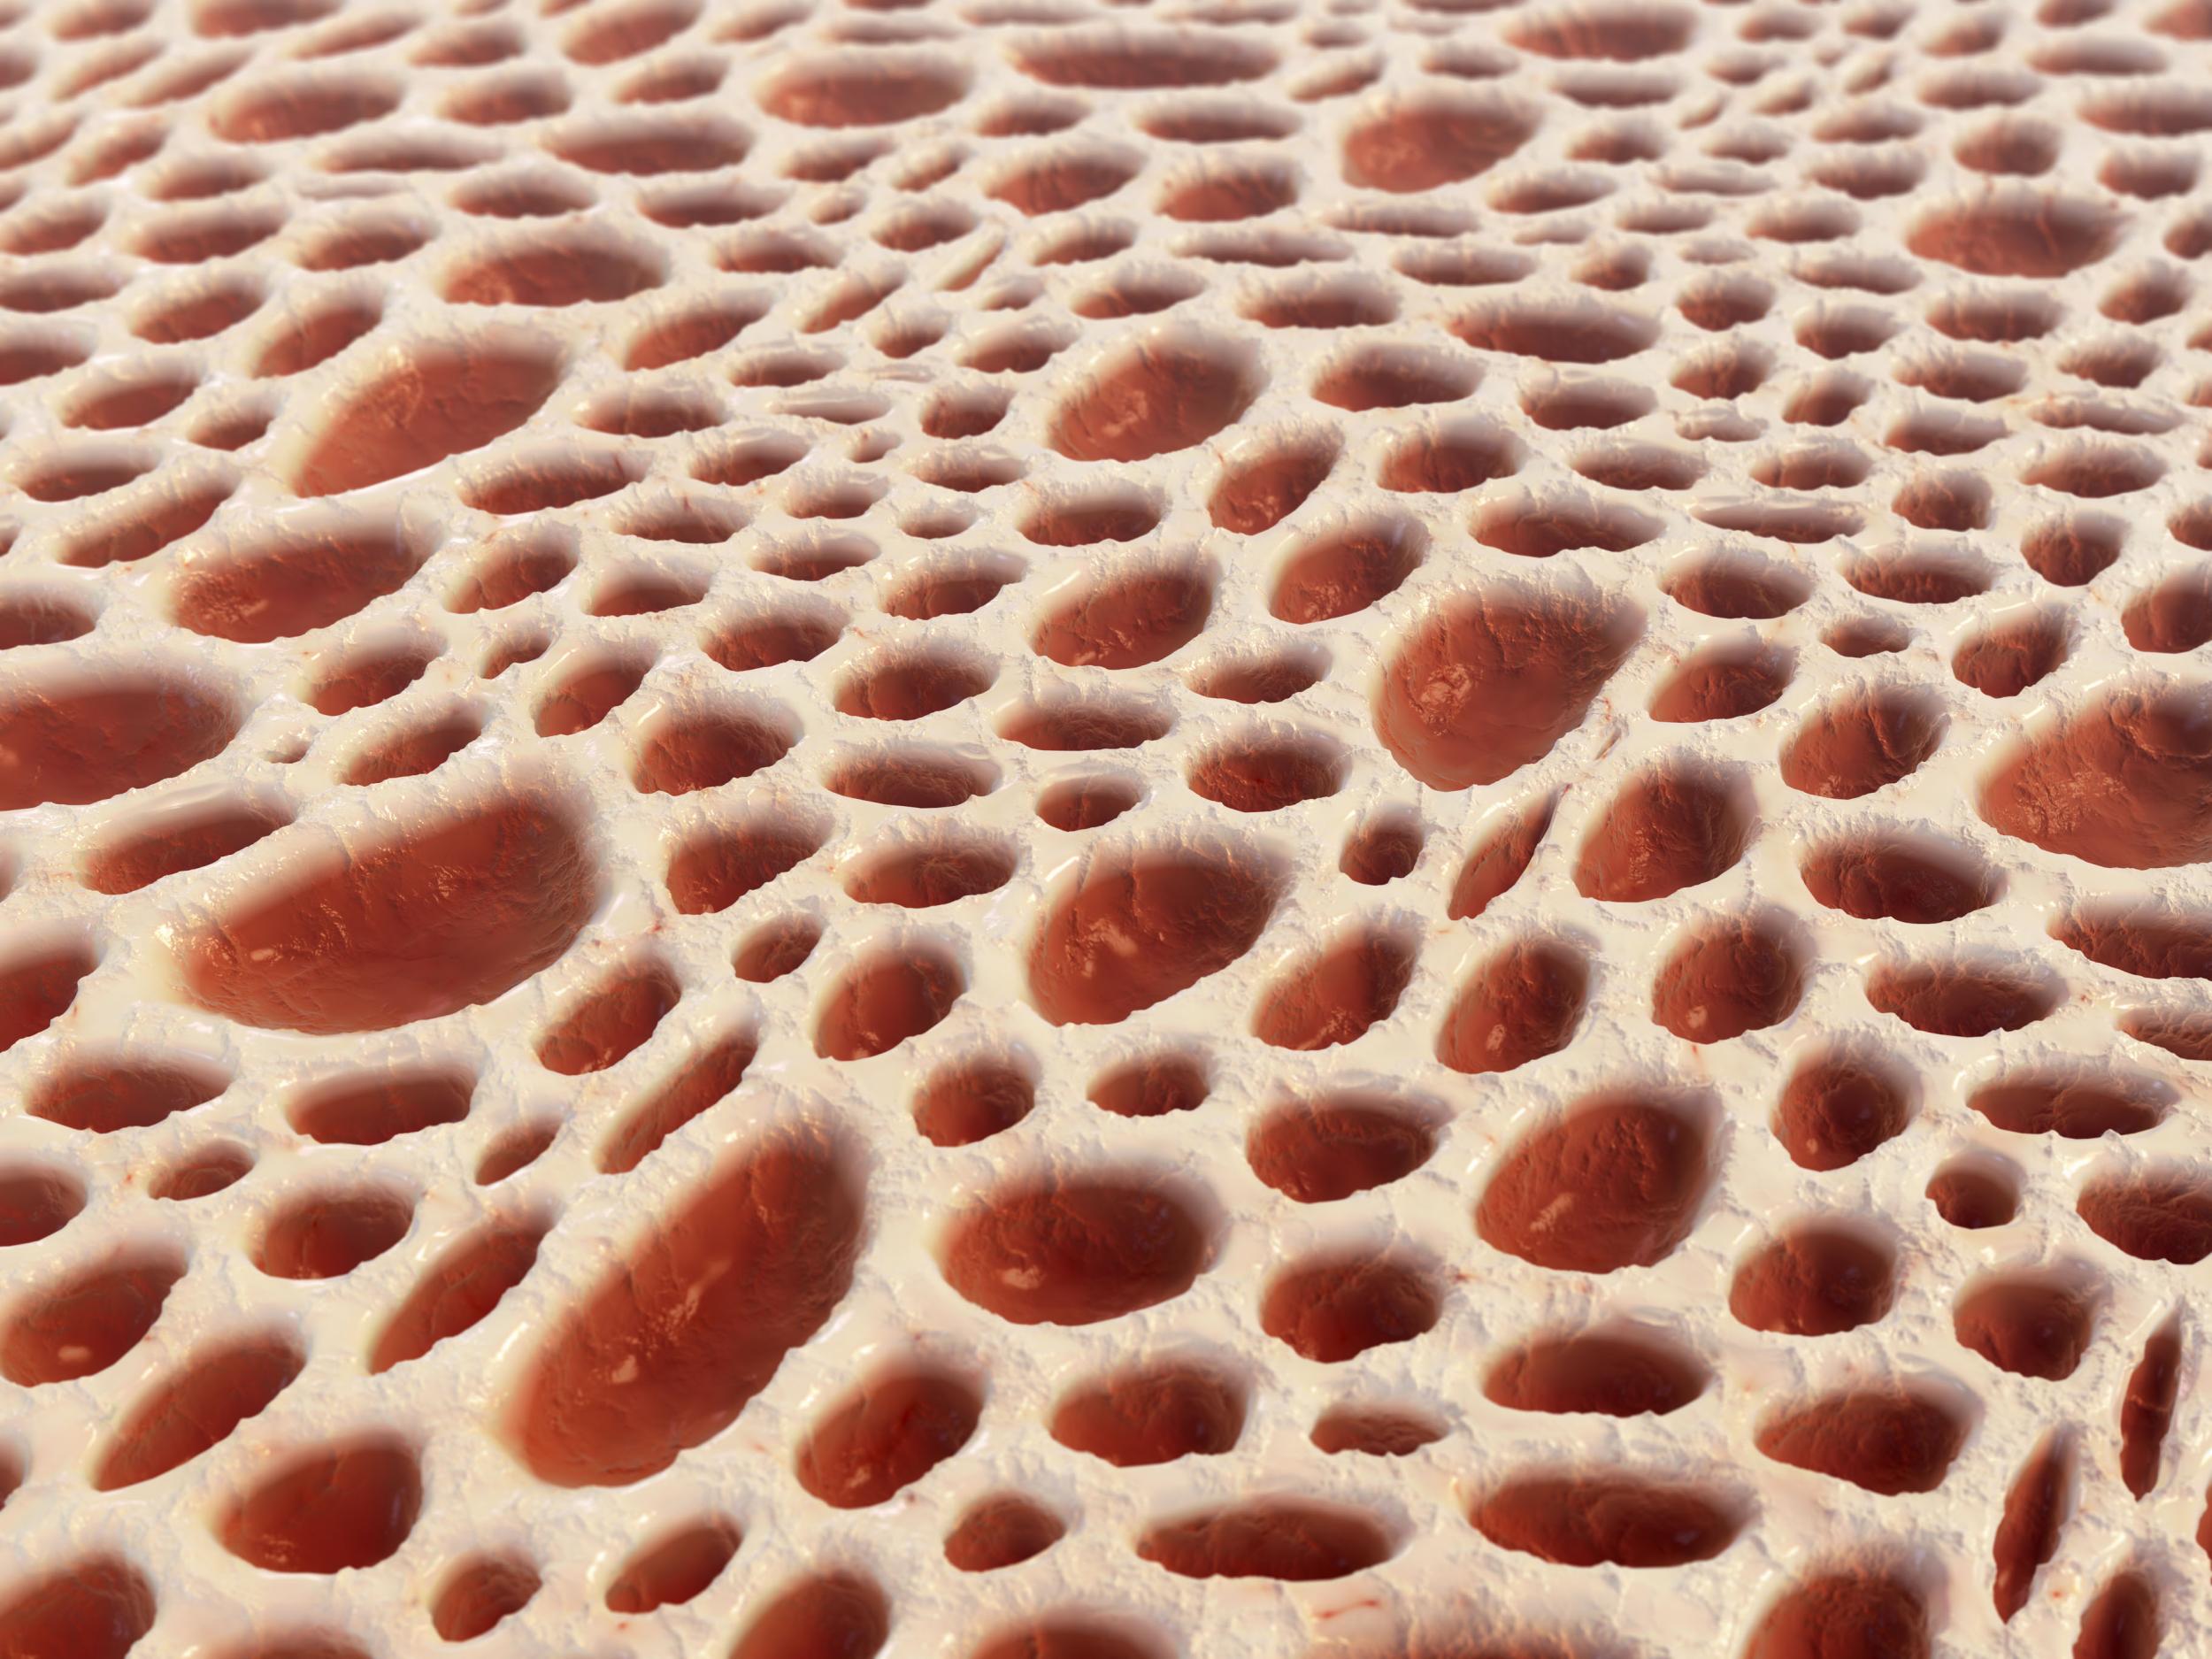 The interior of our bones is sponge-like in appearance, and surrounds red bone marrow